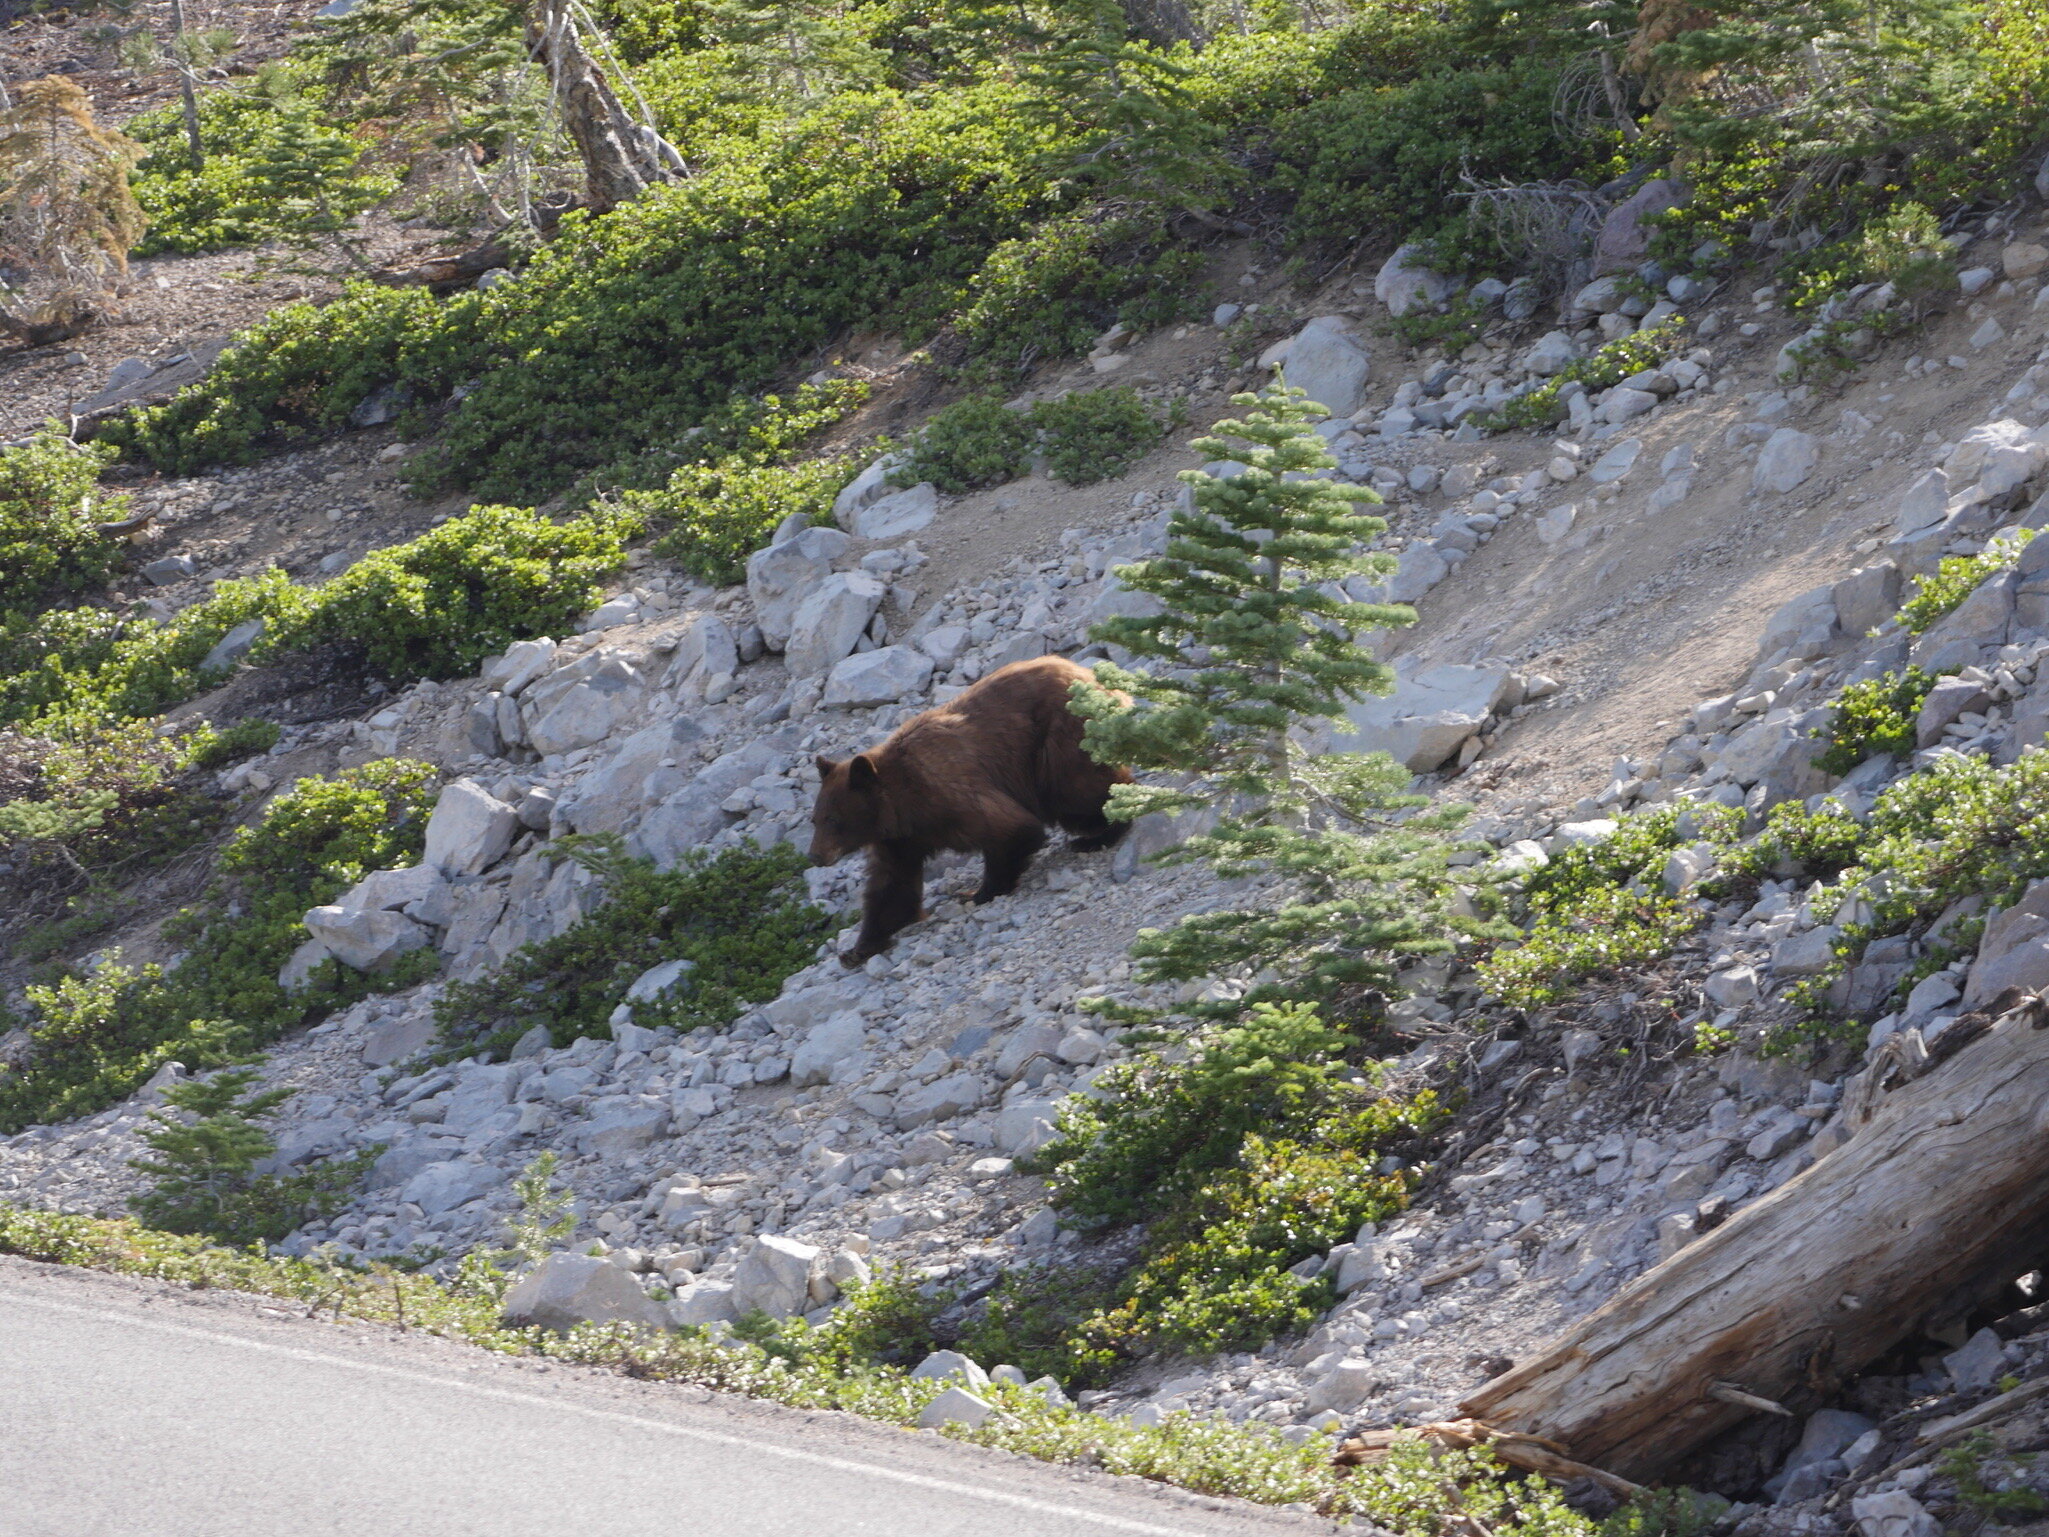 Photo 6 - Bear coming down slope to cross road.  Photo by Jude Boudreaux, 6/5/21